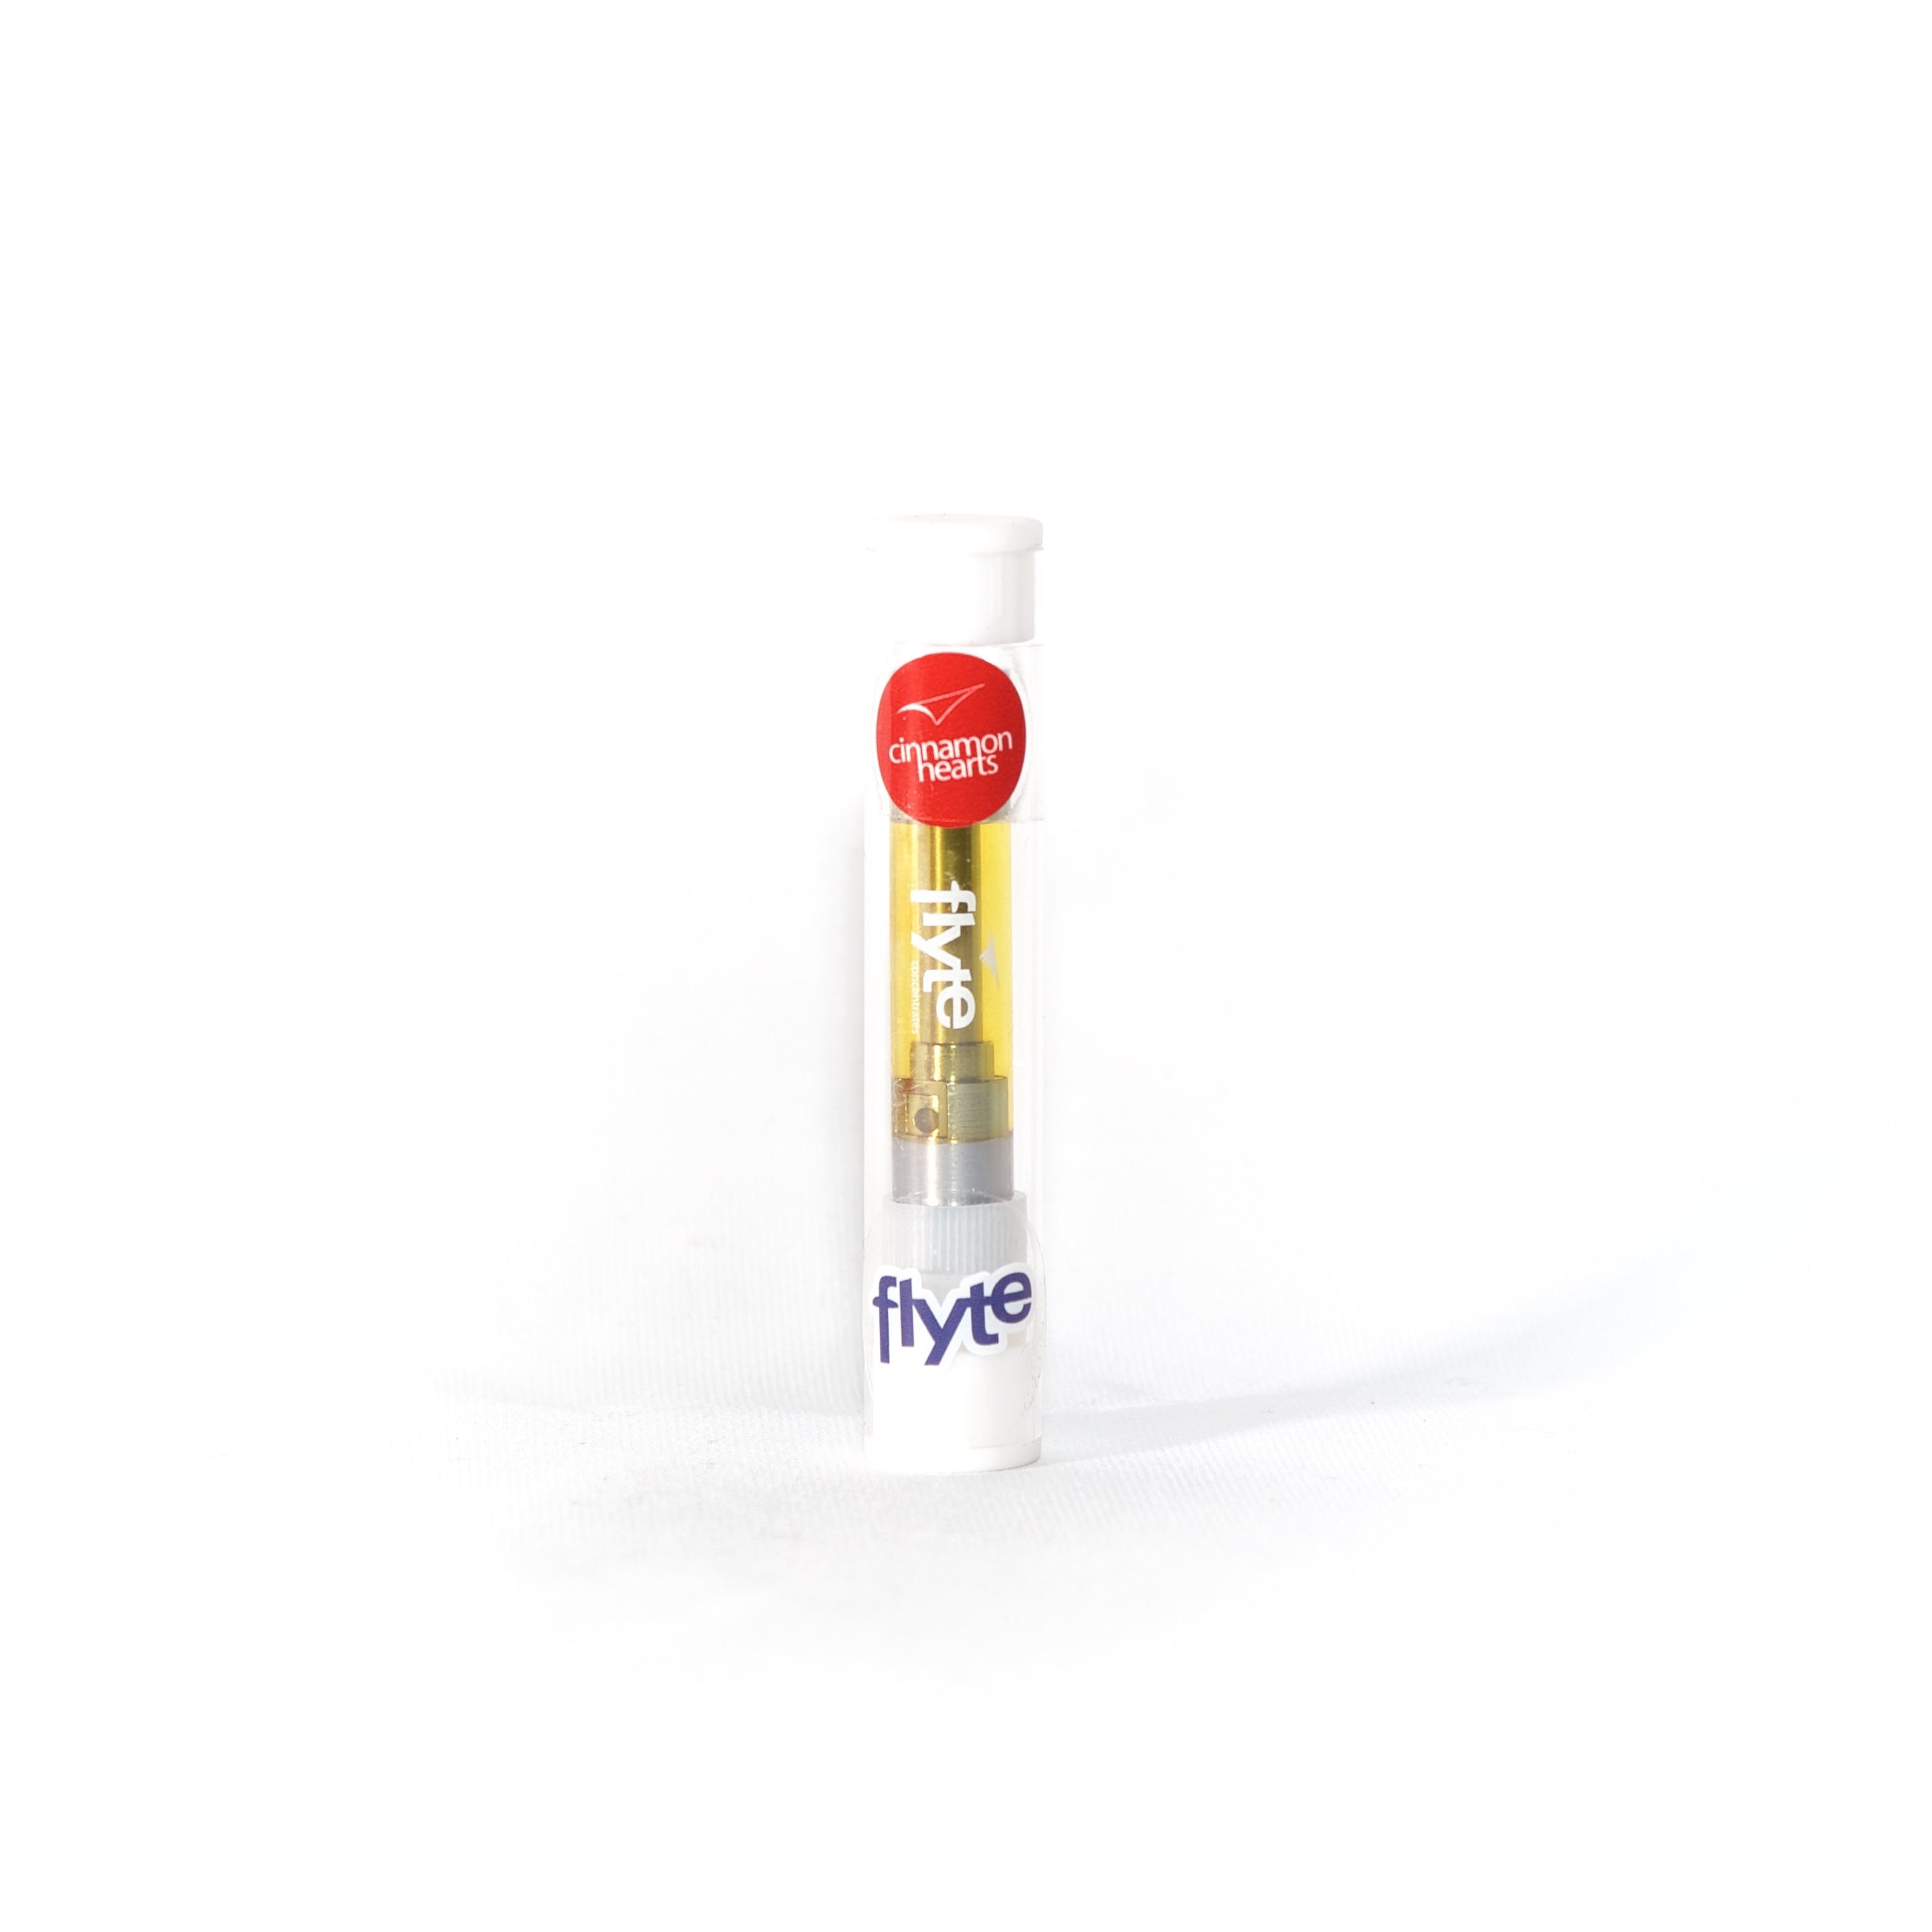 concentrate-cinnamon-hearts-flyte-cartridge